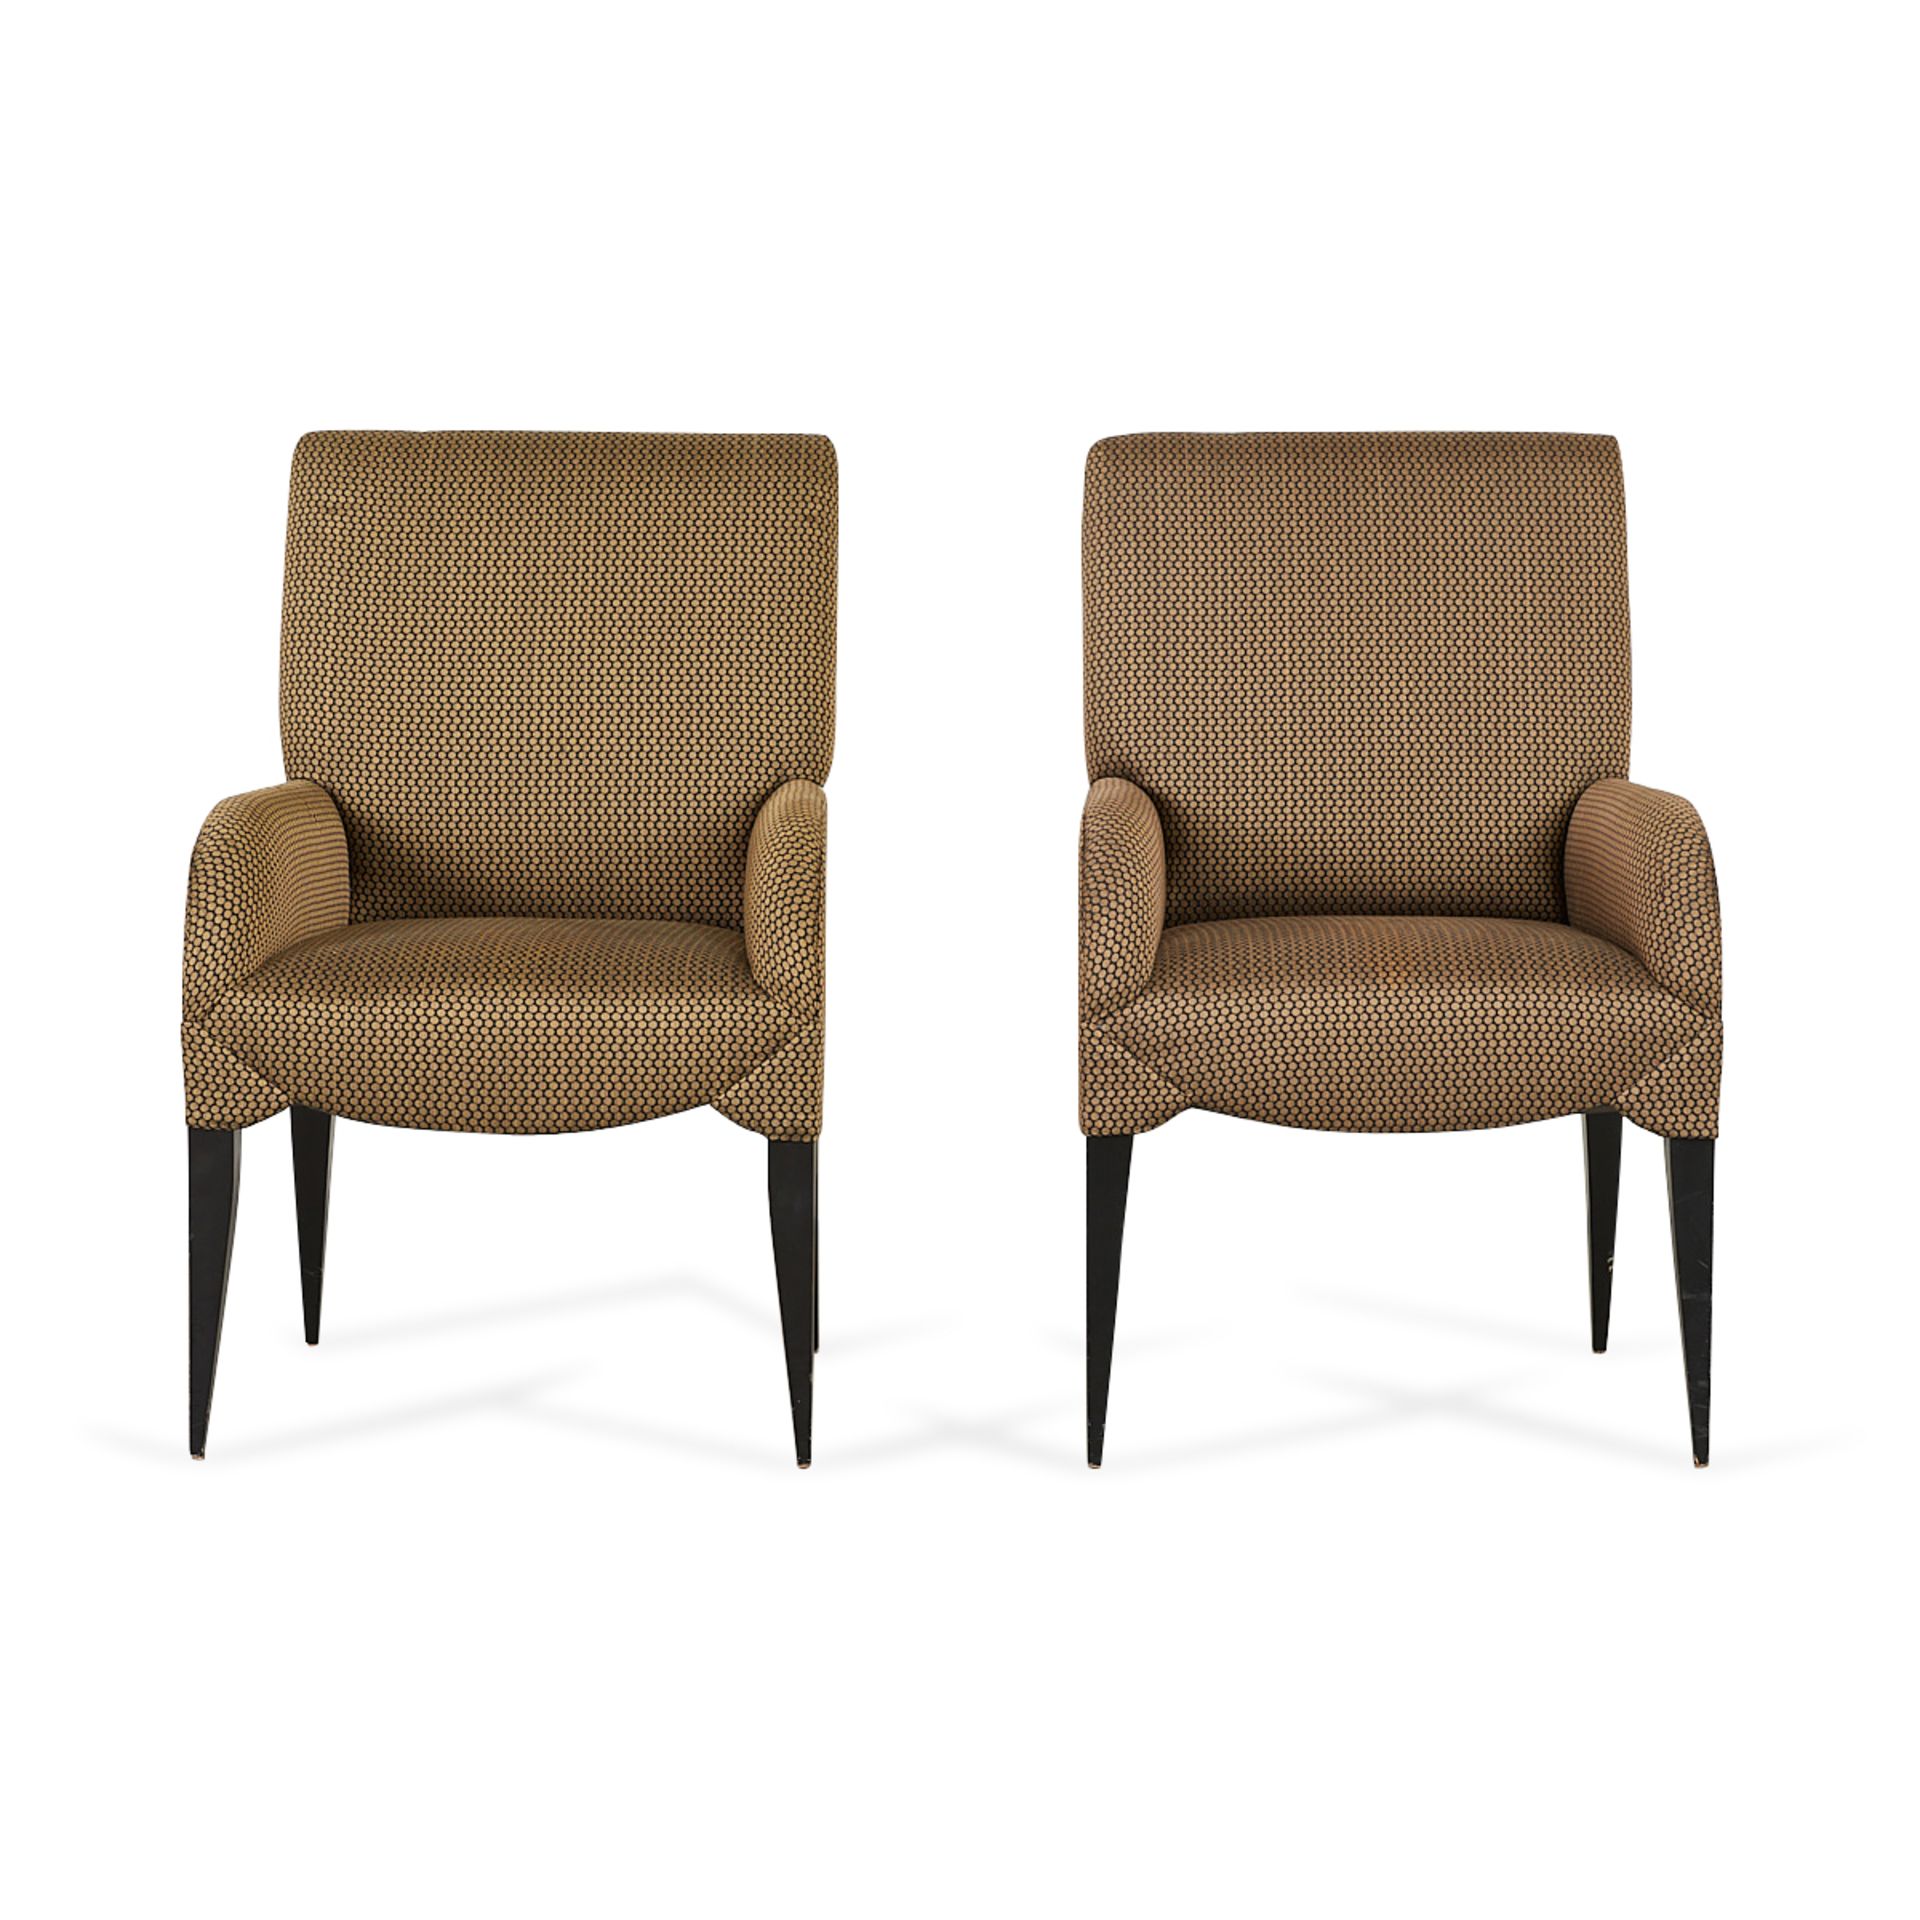 Set of 4 Larry Laslo for Directional Chairs - Image 7 of 17